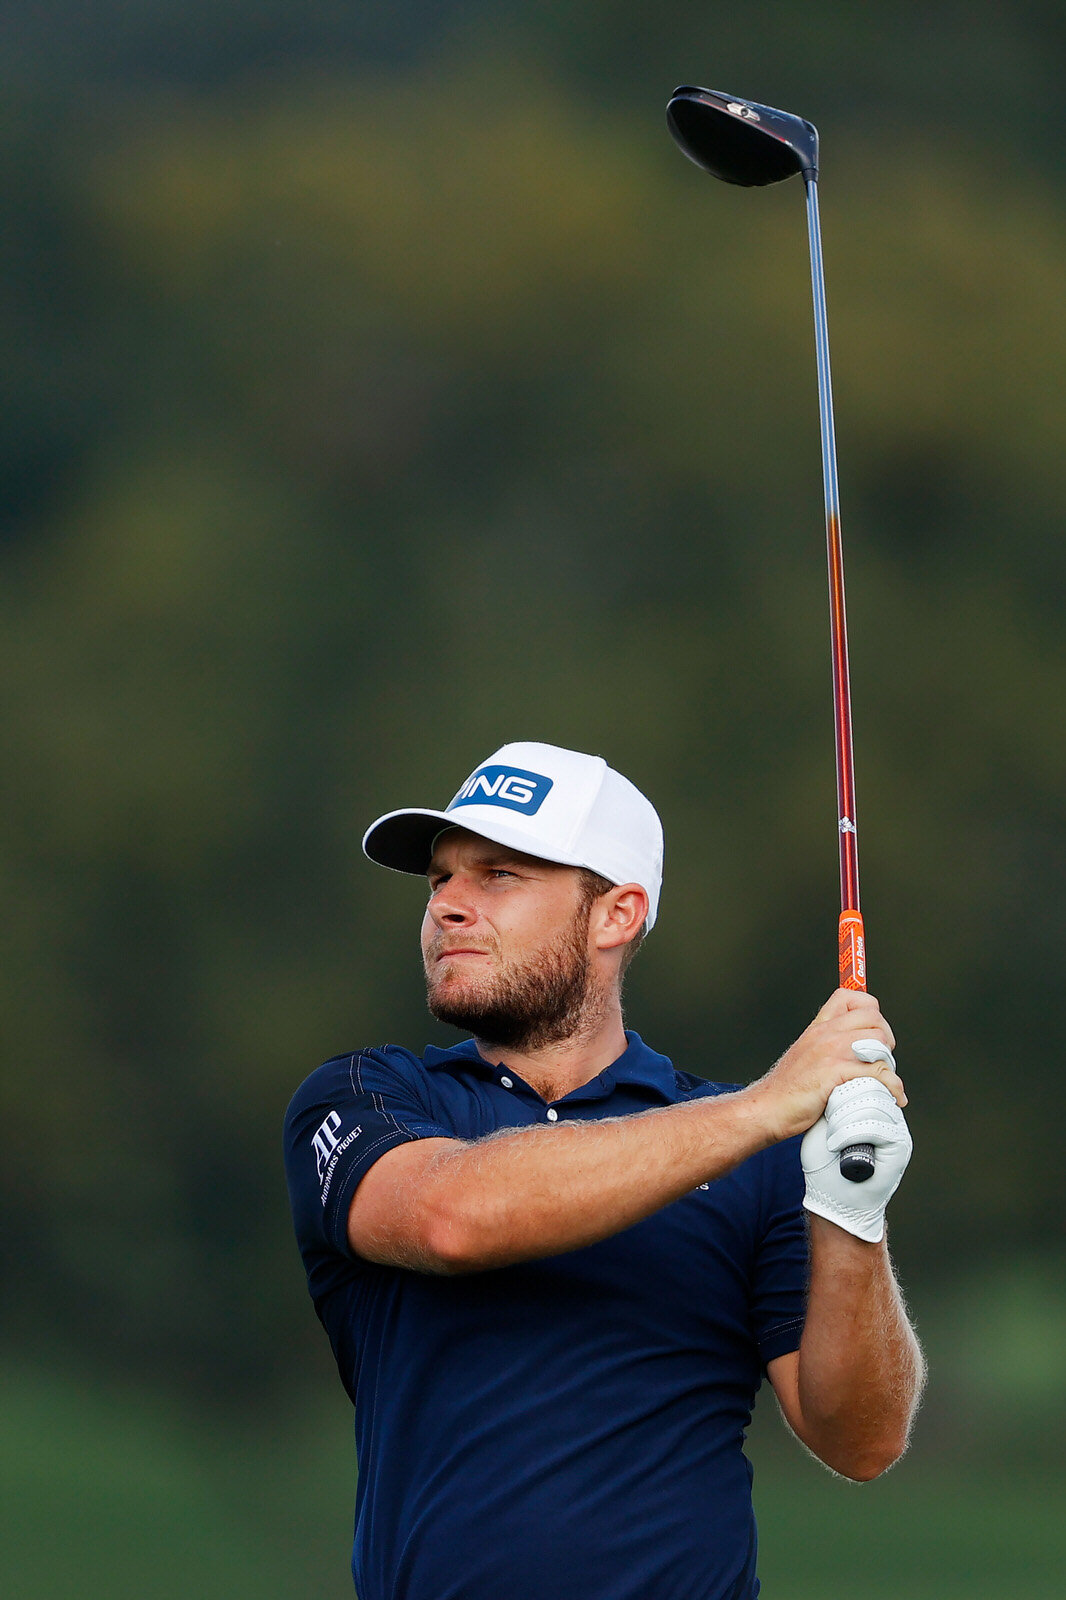  ATLANTA, GEORGIA - SEPTEMBER 05: Tyrrell Hatton of England plays his shot from the 16th tee during the second round of the TOUR Championship at East Lake Golf Club on September 05, 2020 in Atlanta, Georgia. (Photo by Kevin C. Cox/Getty Images) 